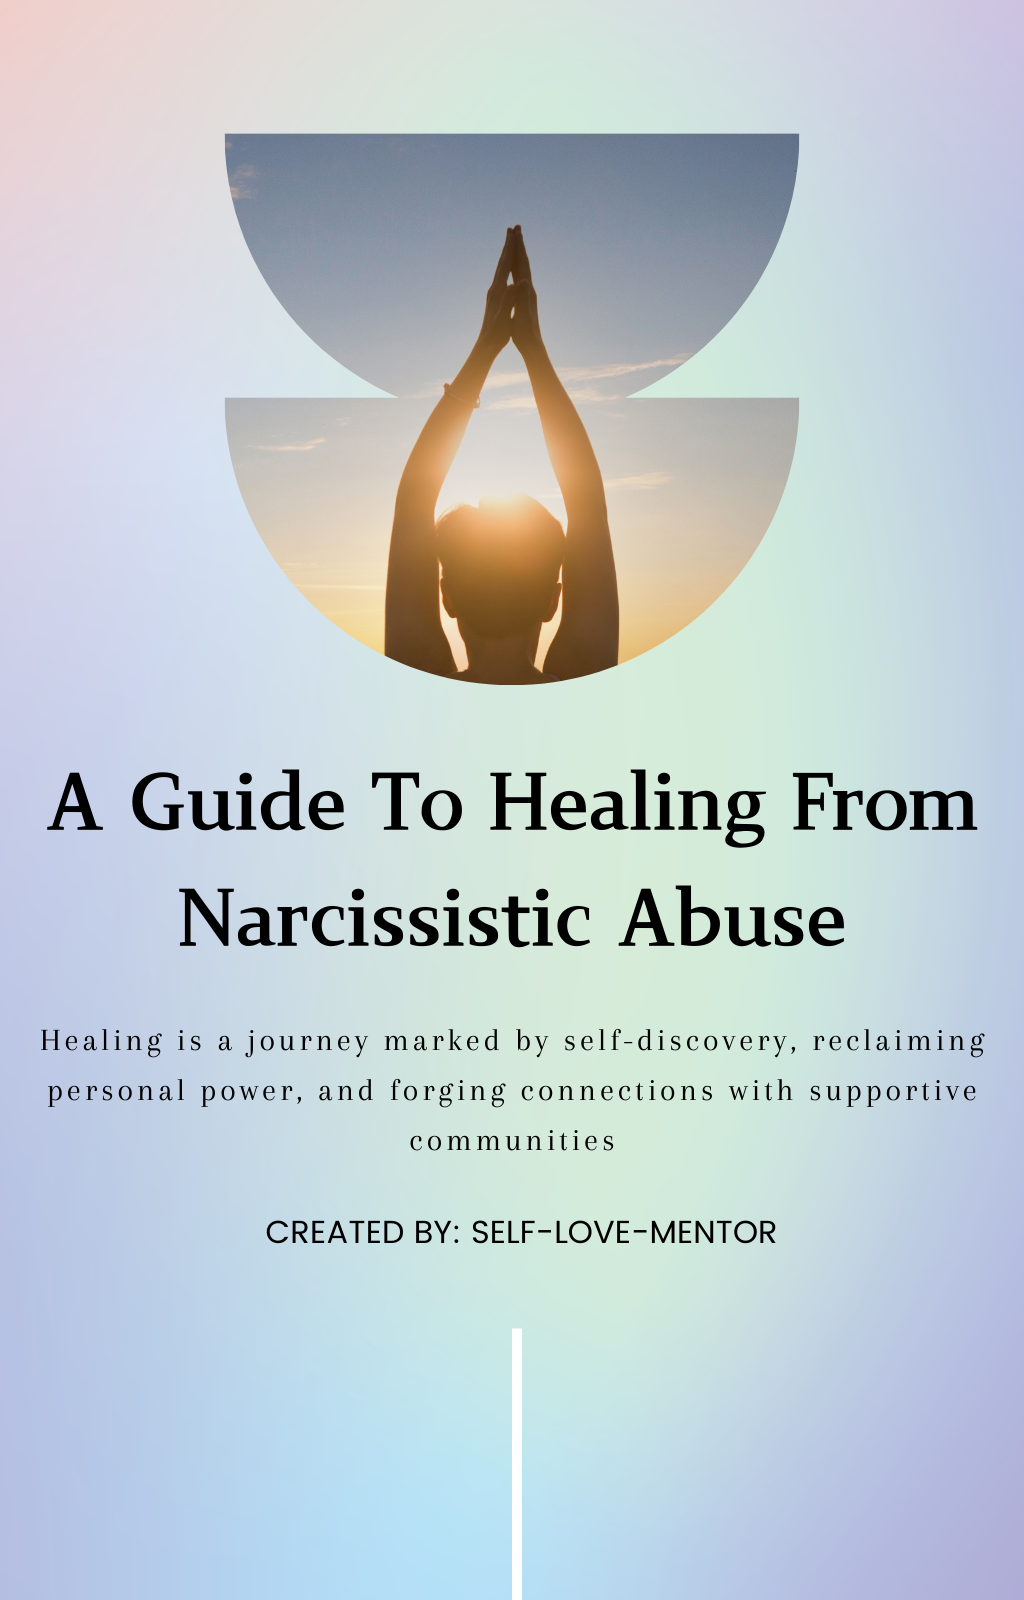 A Guide To Healing From Narcissistic Abuse